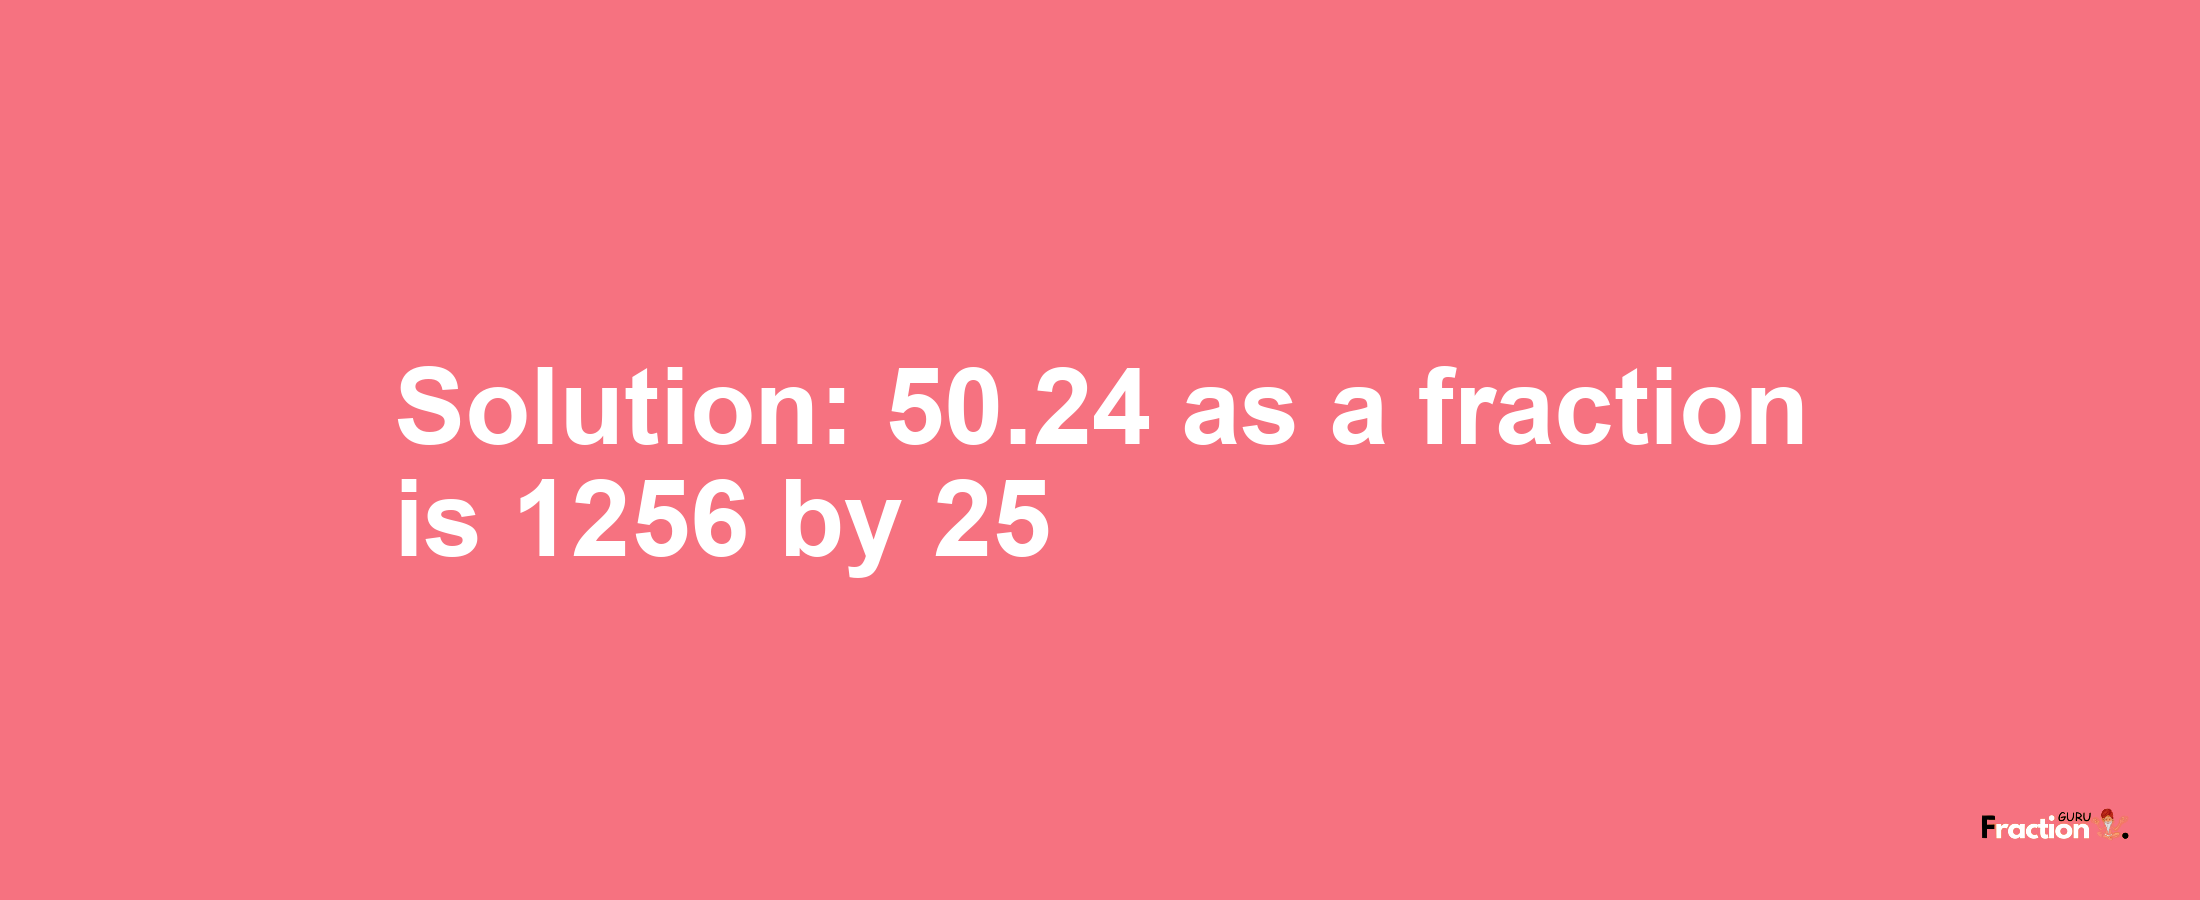 Solution:50.24 as a fraction is 1256/25